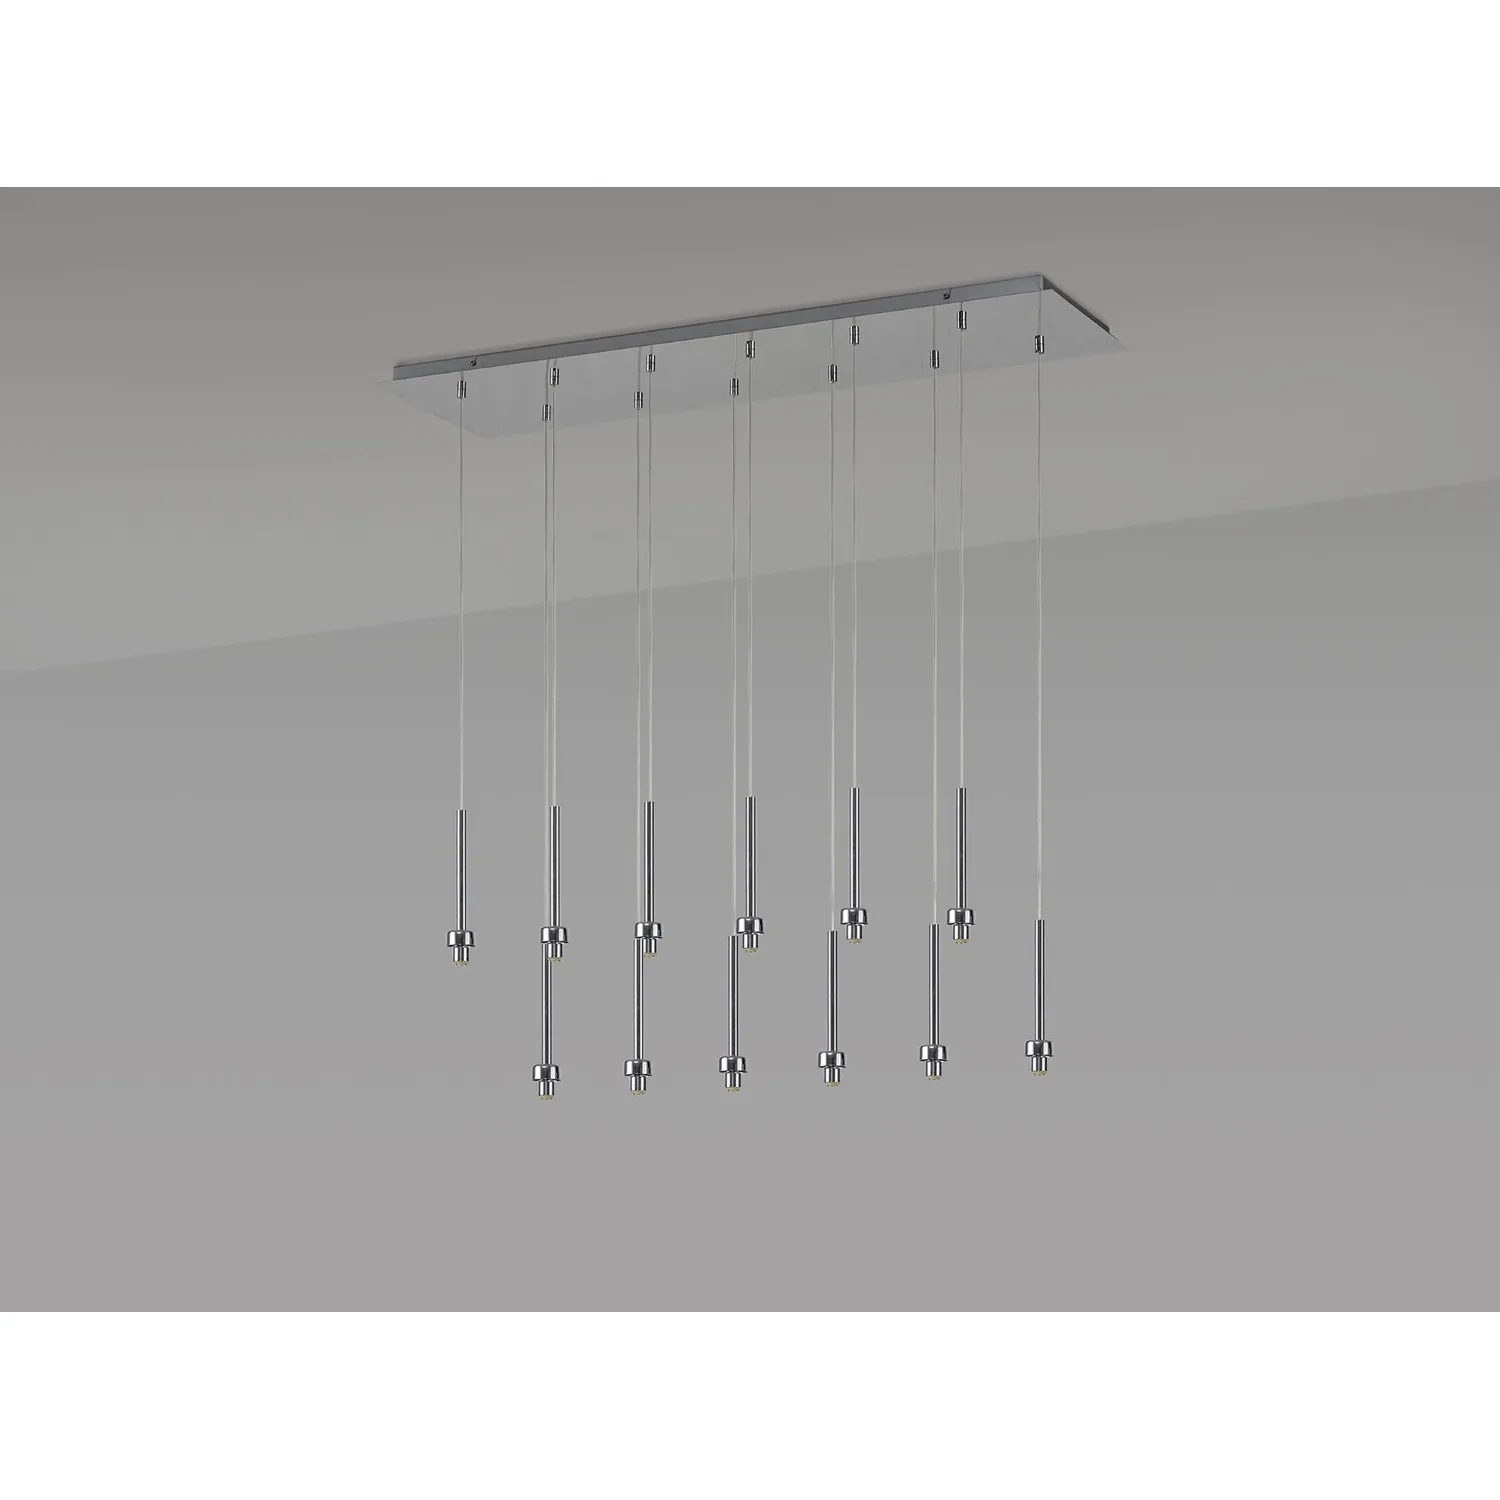 Abingdon Polished Chrome 12 Light G9 Universal 2m Linear Pendant, Suitable For A Vast Selection Of Glass Shades